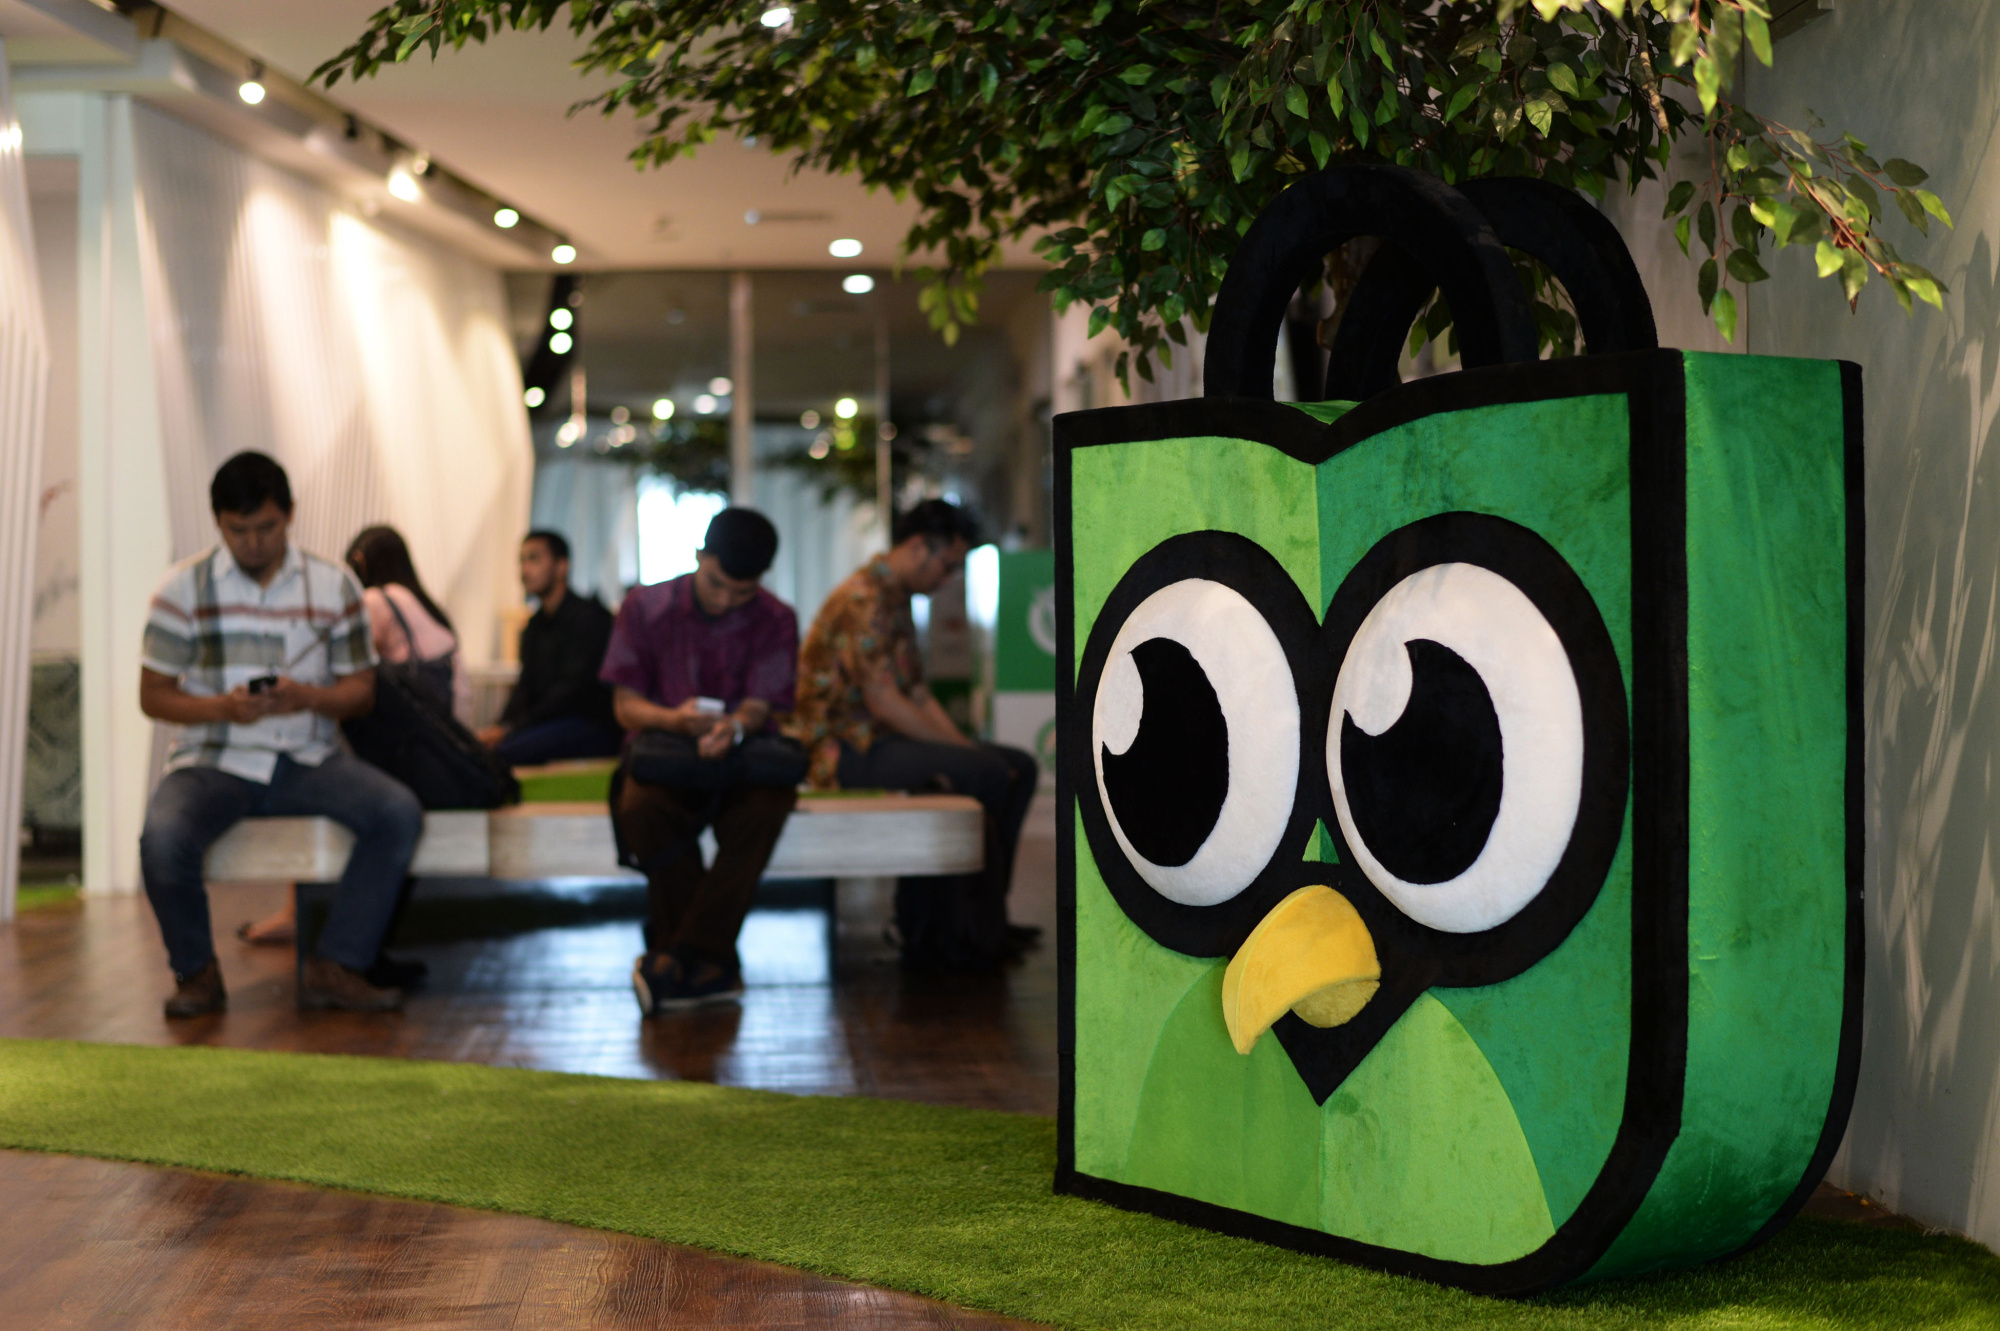 PT Tokopedia's mascot Toped sits on display in the reception area at the company's offices in Jakarta, Indonesia.&nbsp;